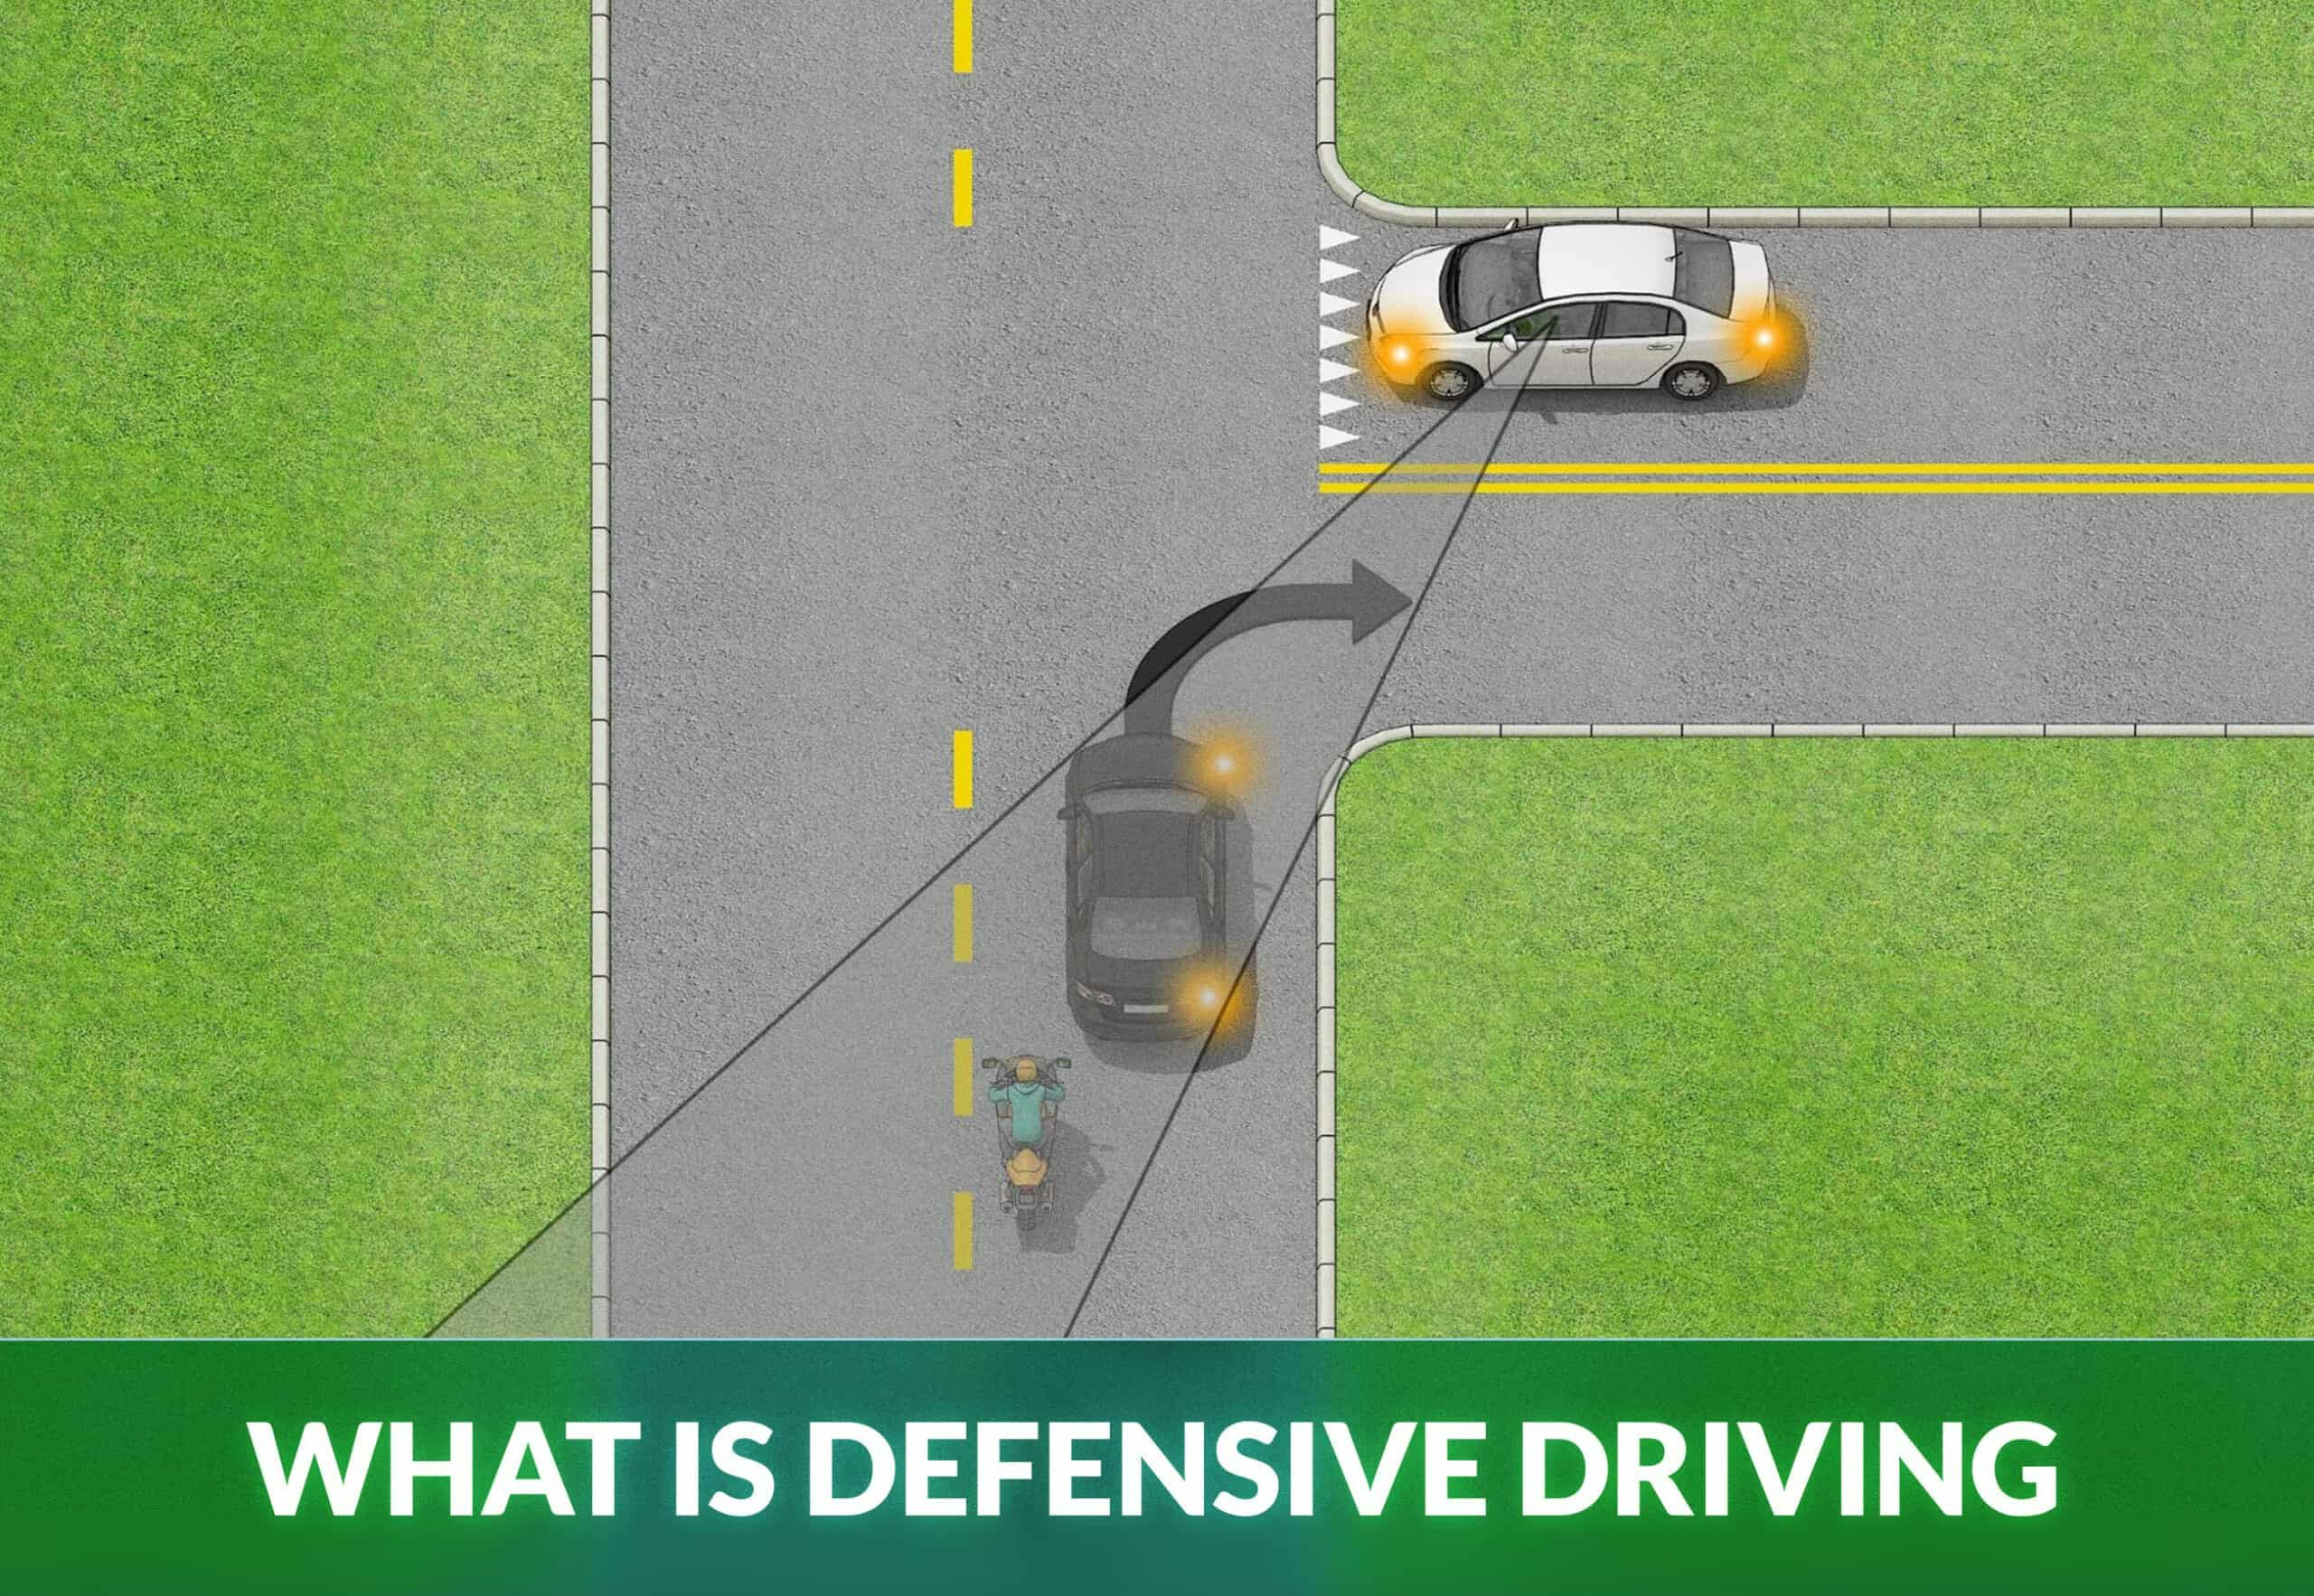 What Is Defensive Driving? 6 Tips How to Drive Defensively